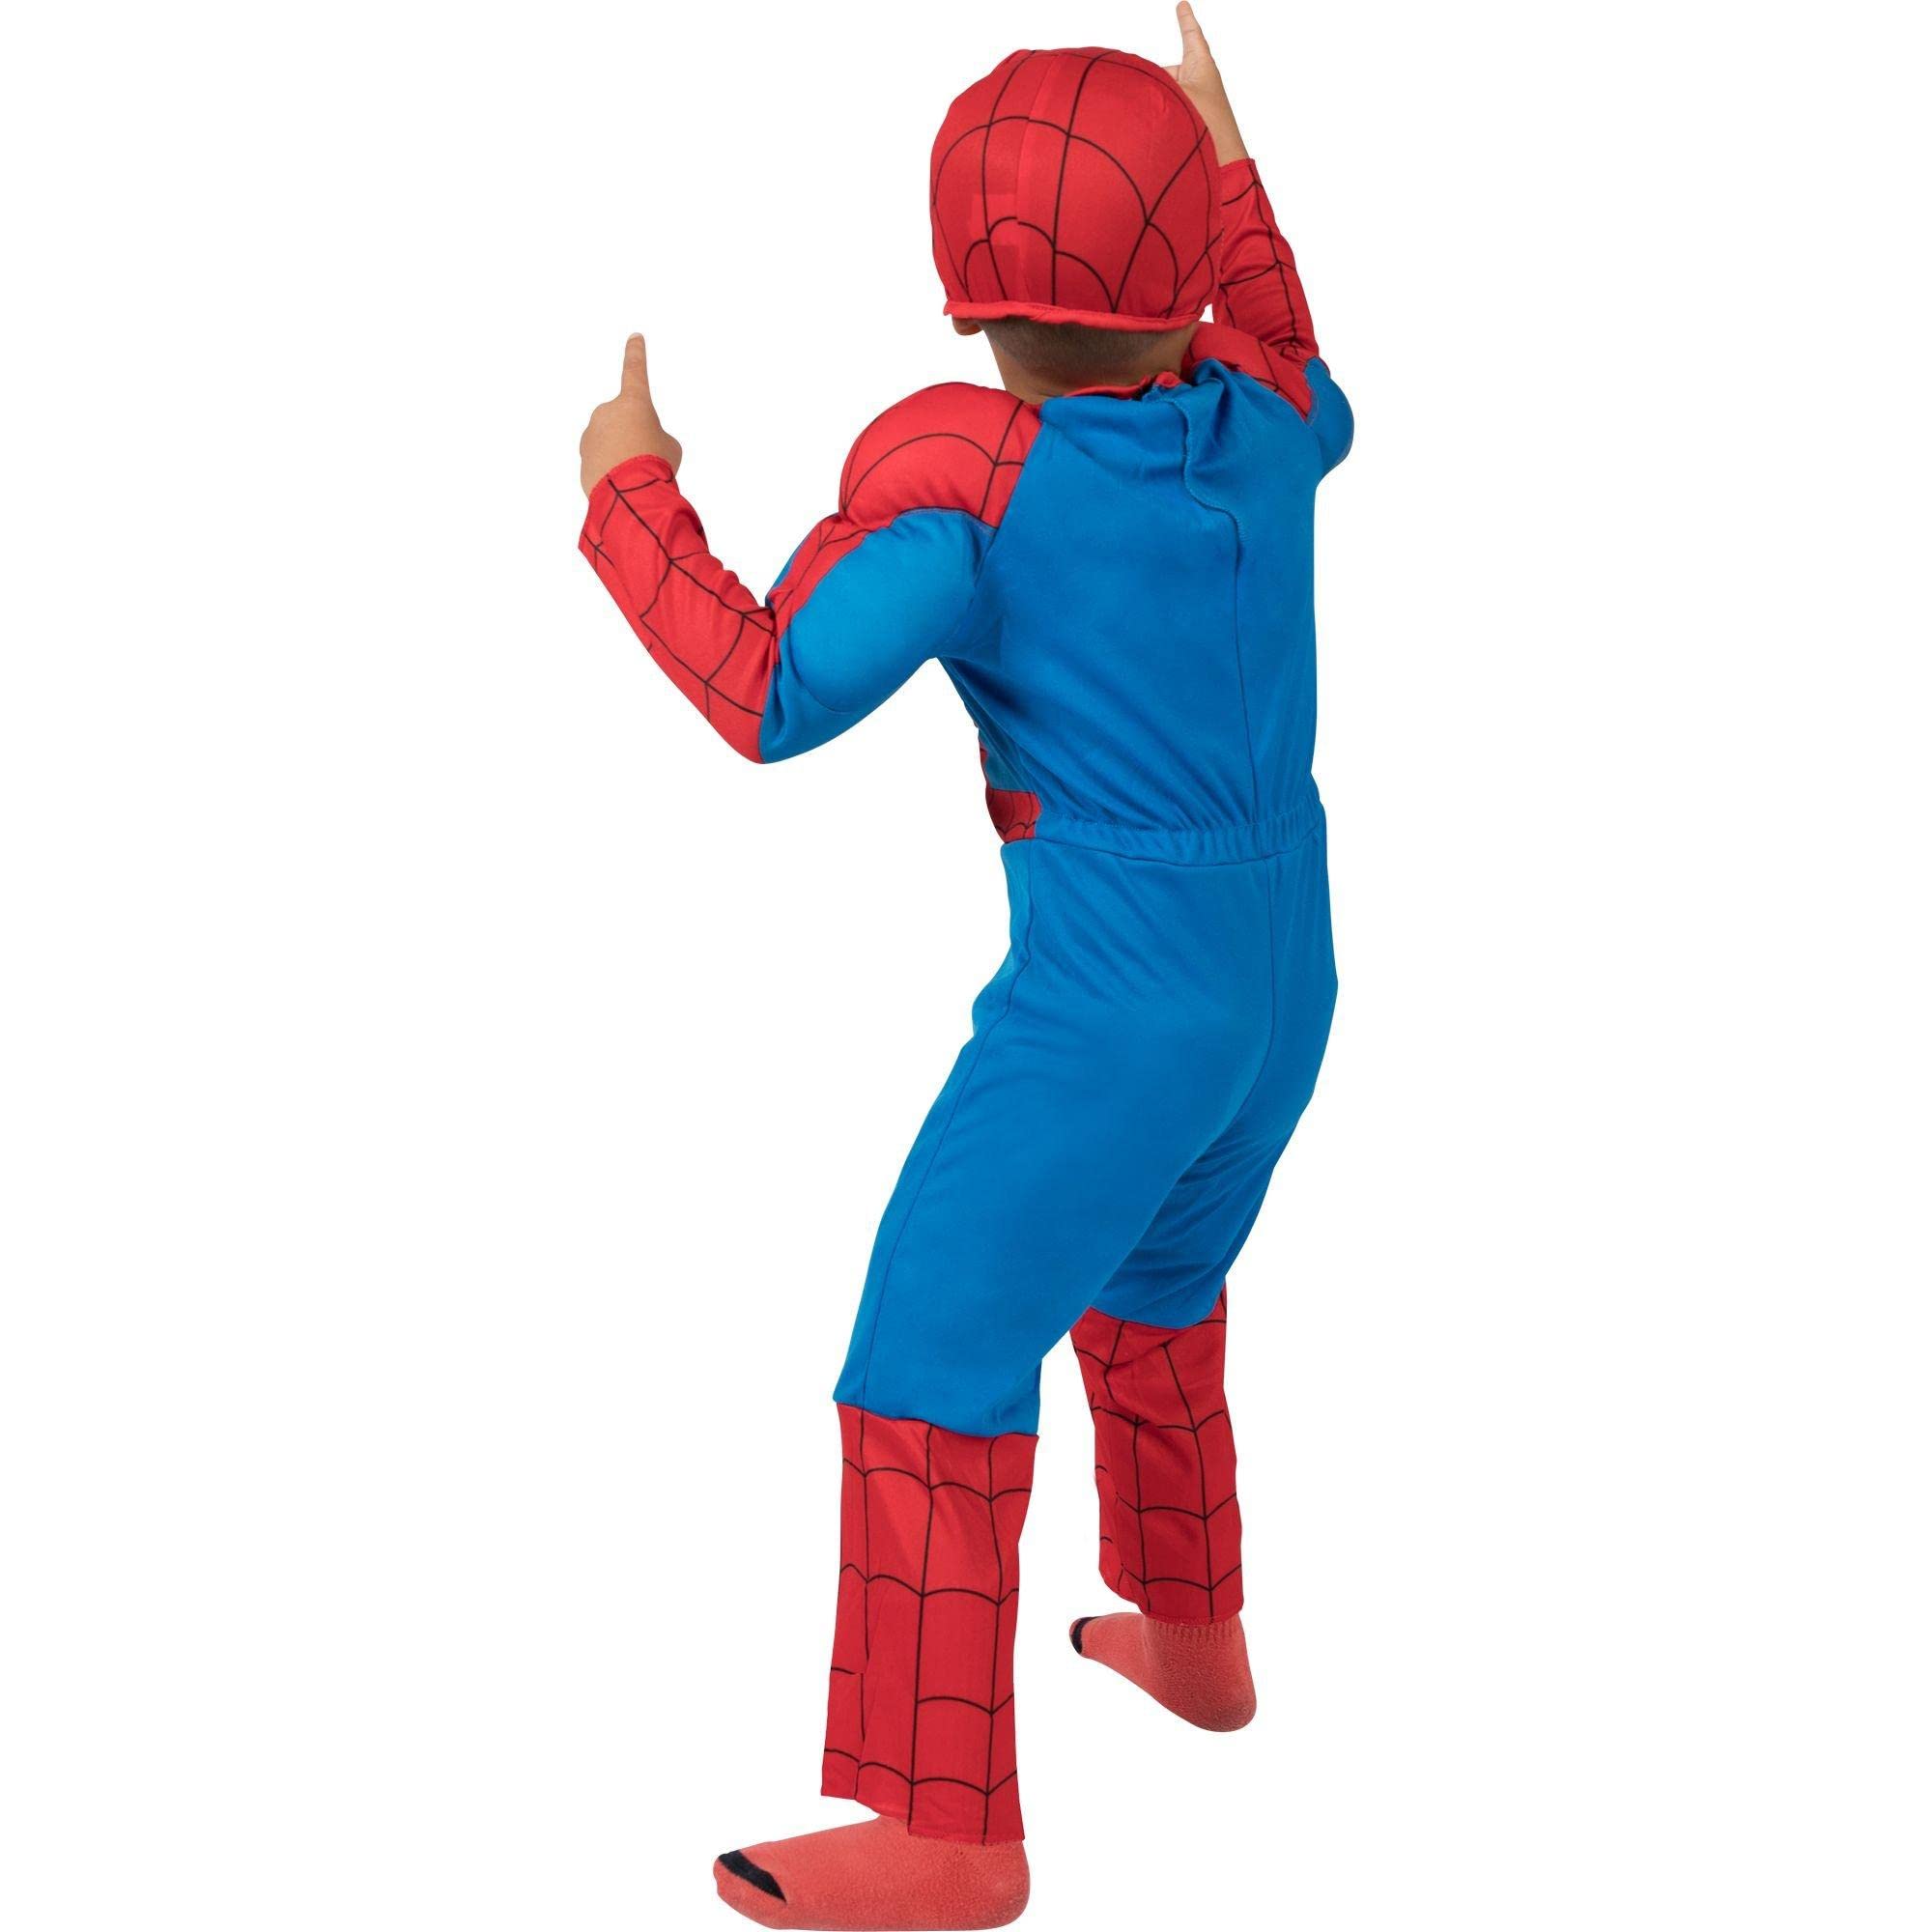 Party City Classic Spider-Man Muscle Halloween Costume for Toddler Boys, Includes Headpiece